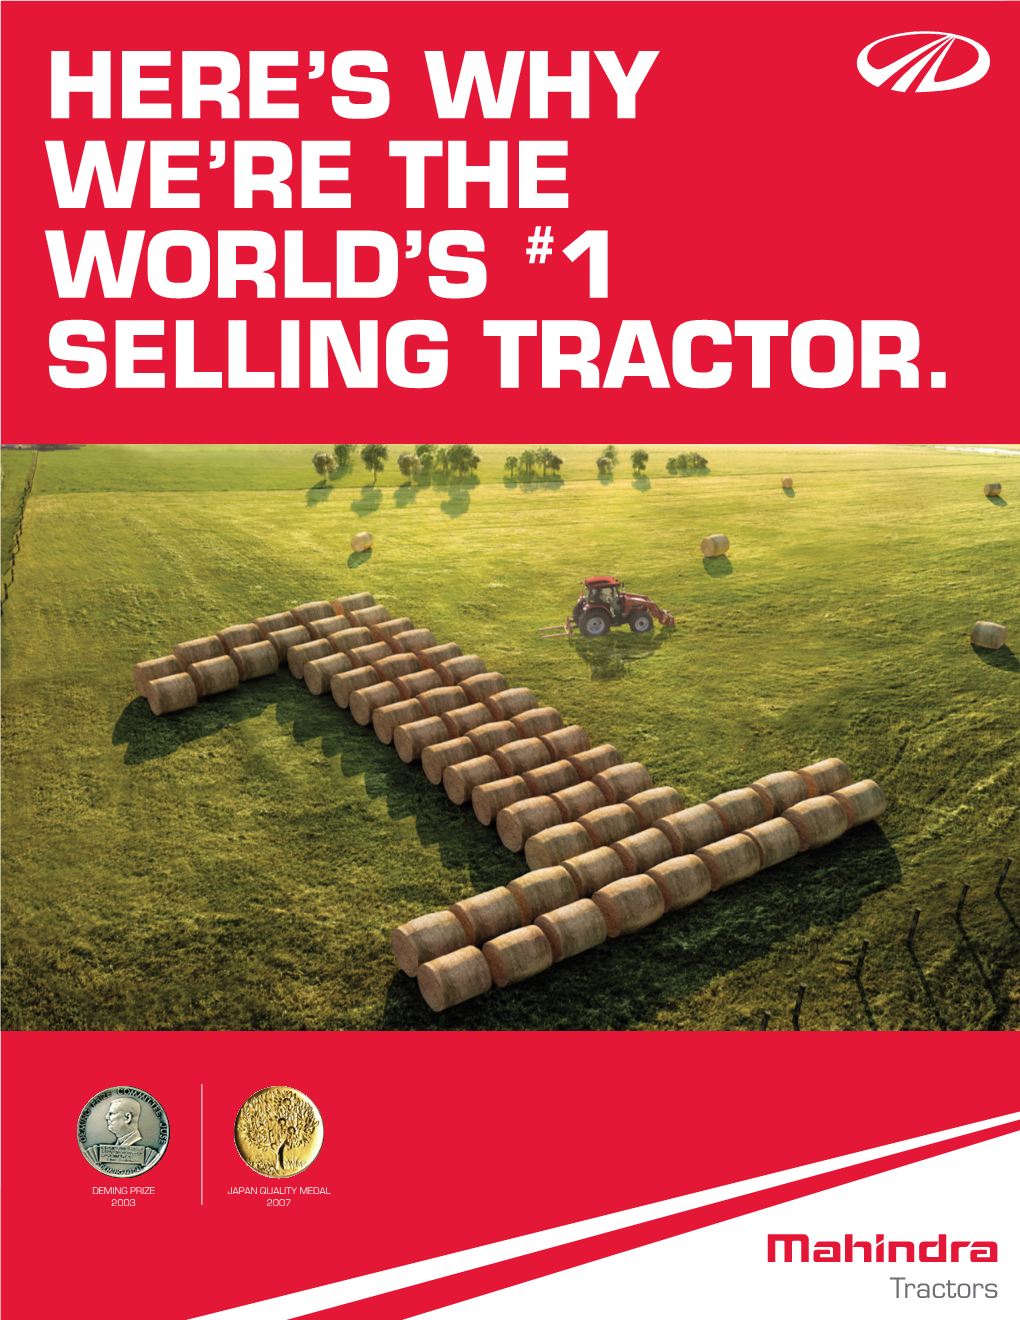 Here's Why We're the World's #1 Selling Tractor